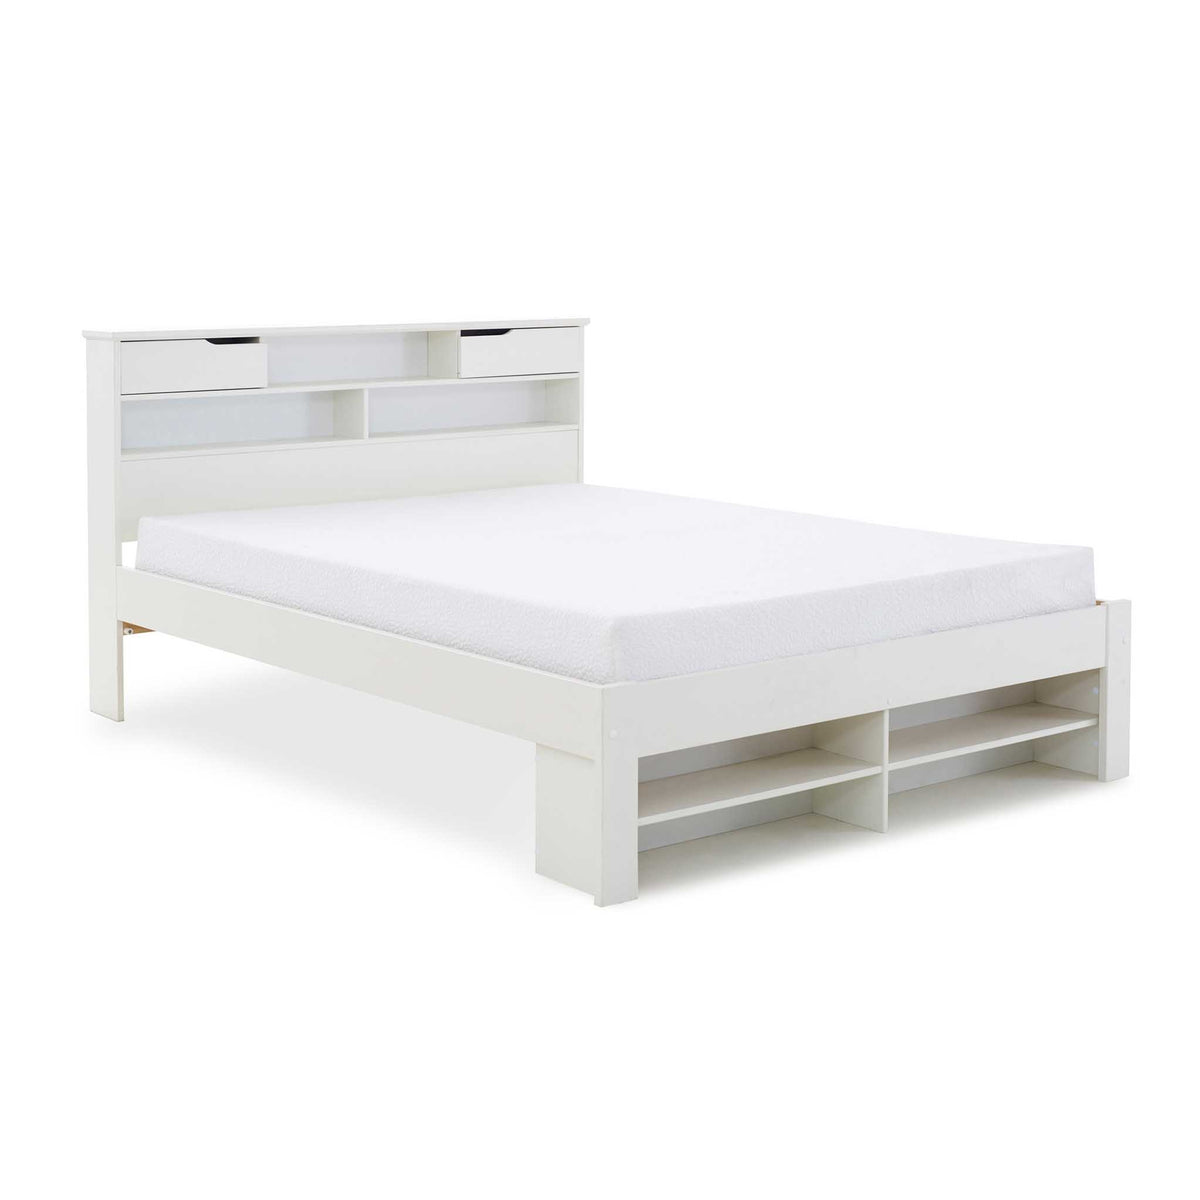 Farndon White Storage Bed with Drawers without drawer